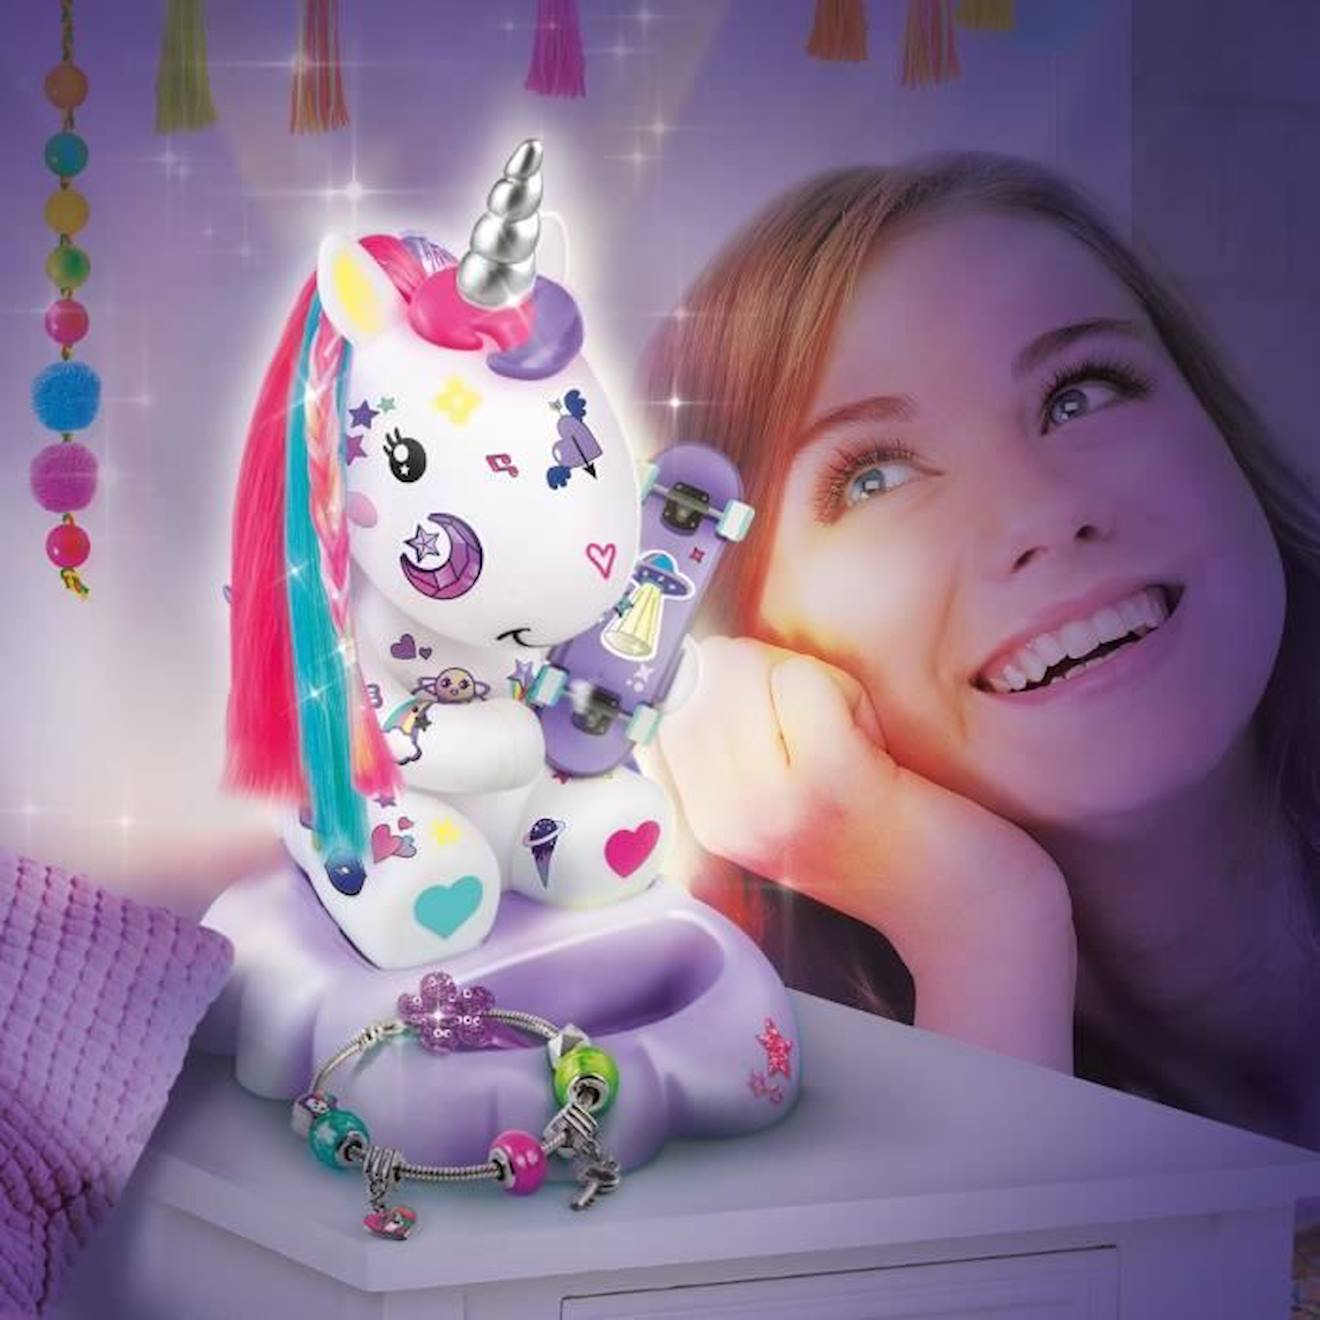 Lampe licorne DIY Canal Toys : King Jouet, Veilleuses Canal Toys